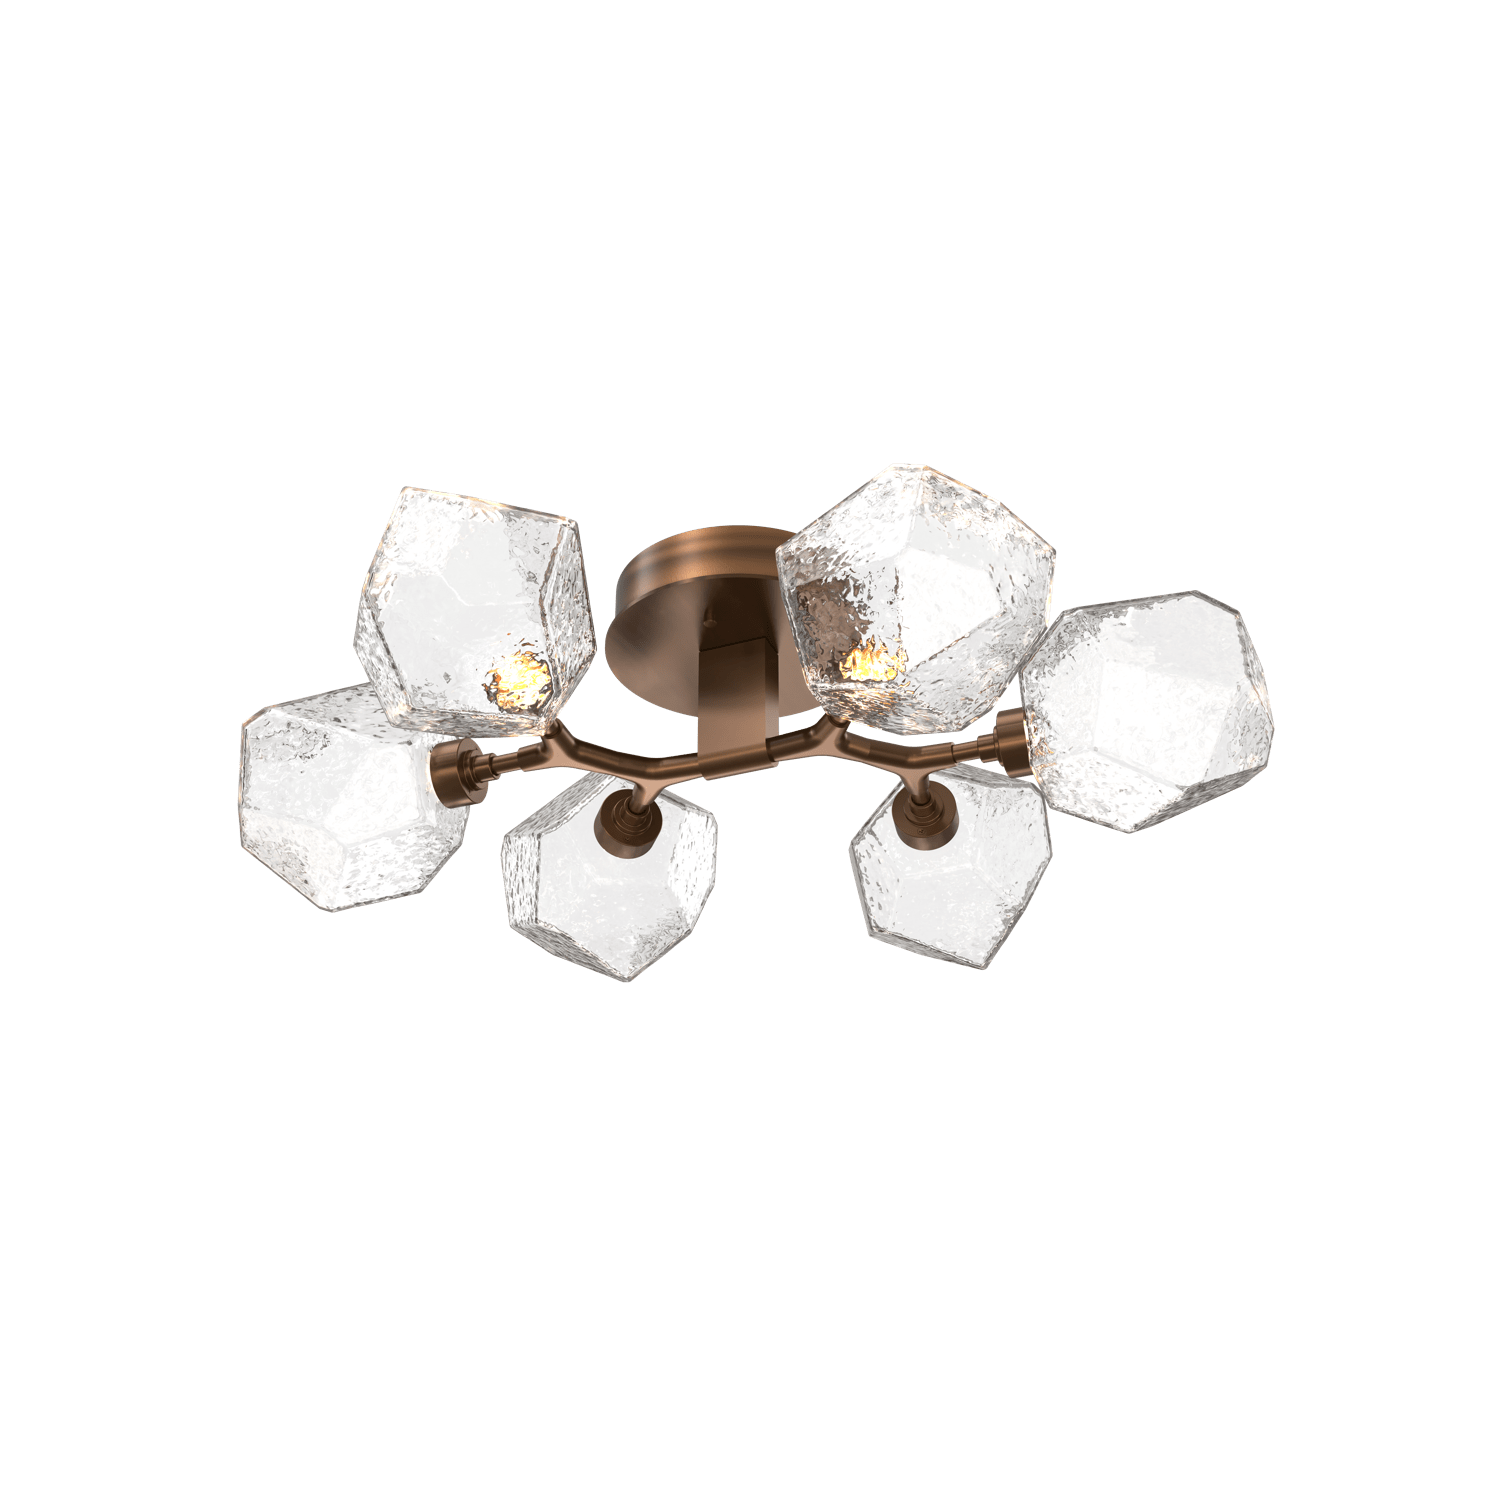 CLB0039-01-RB-C-Hammerton-Studio-Gem-6-light-organic-flush-mount-light-with-oil-rubbed-bronze-finish-and-clear-blown-glass-shades-and-LED-lamping